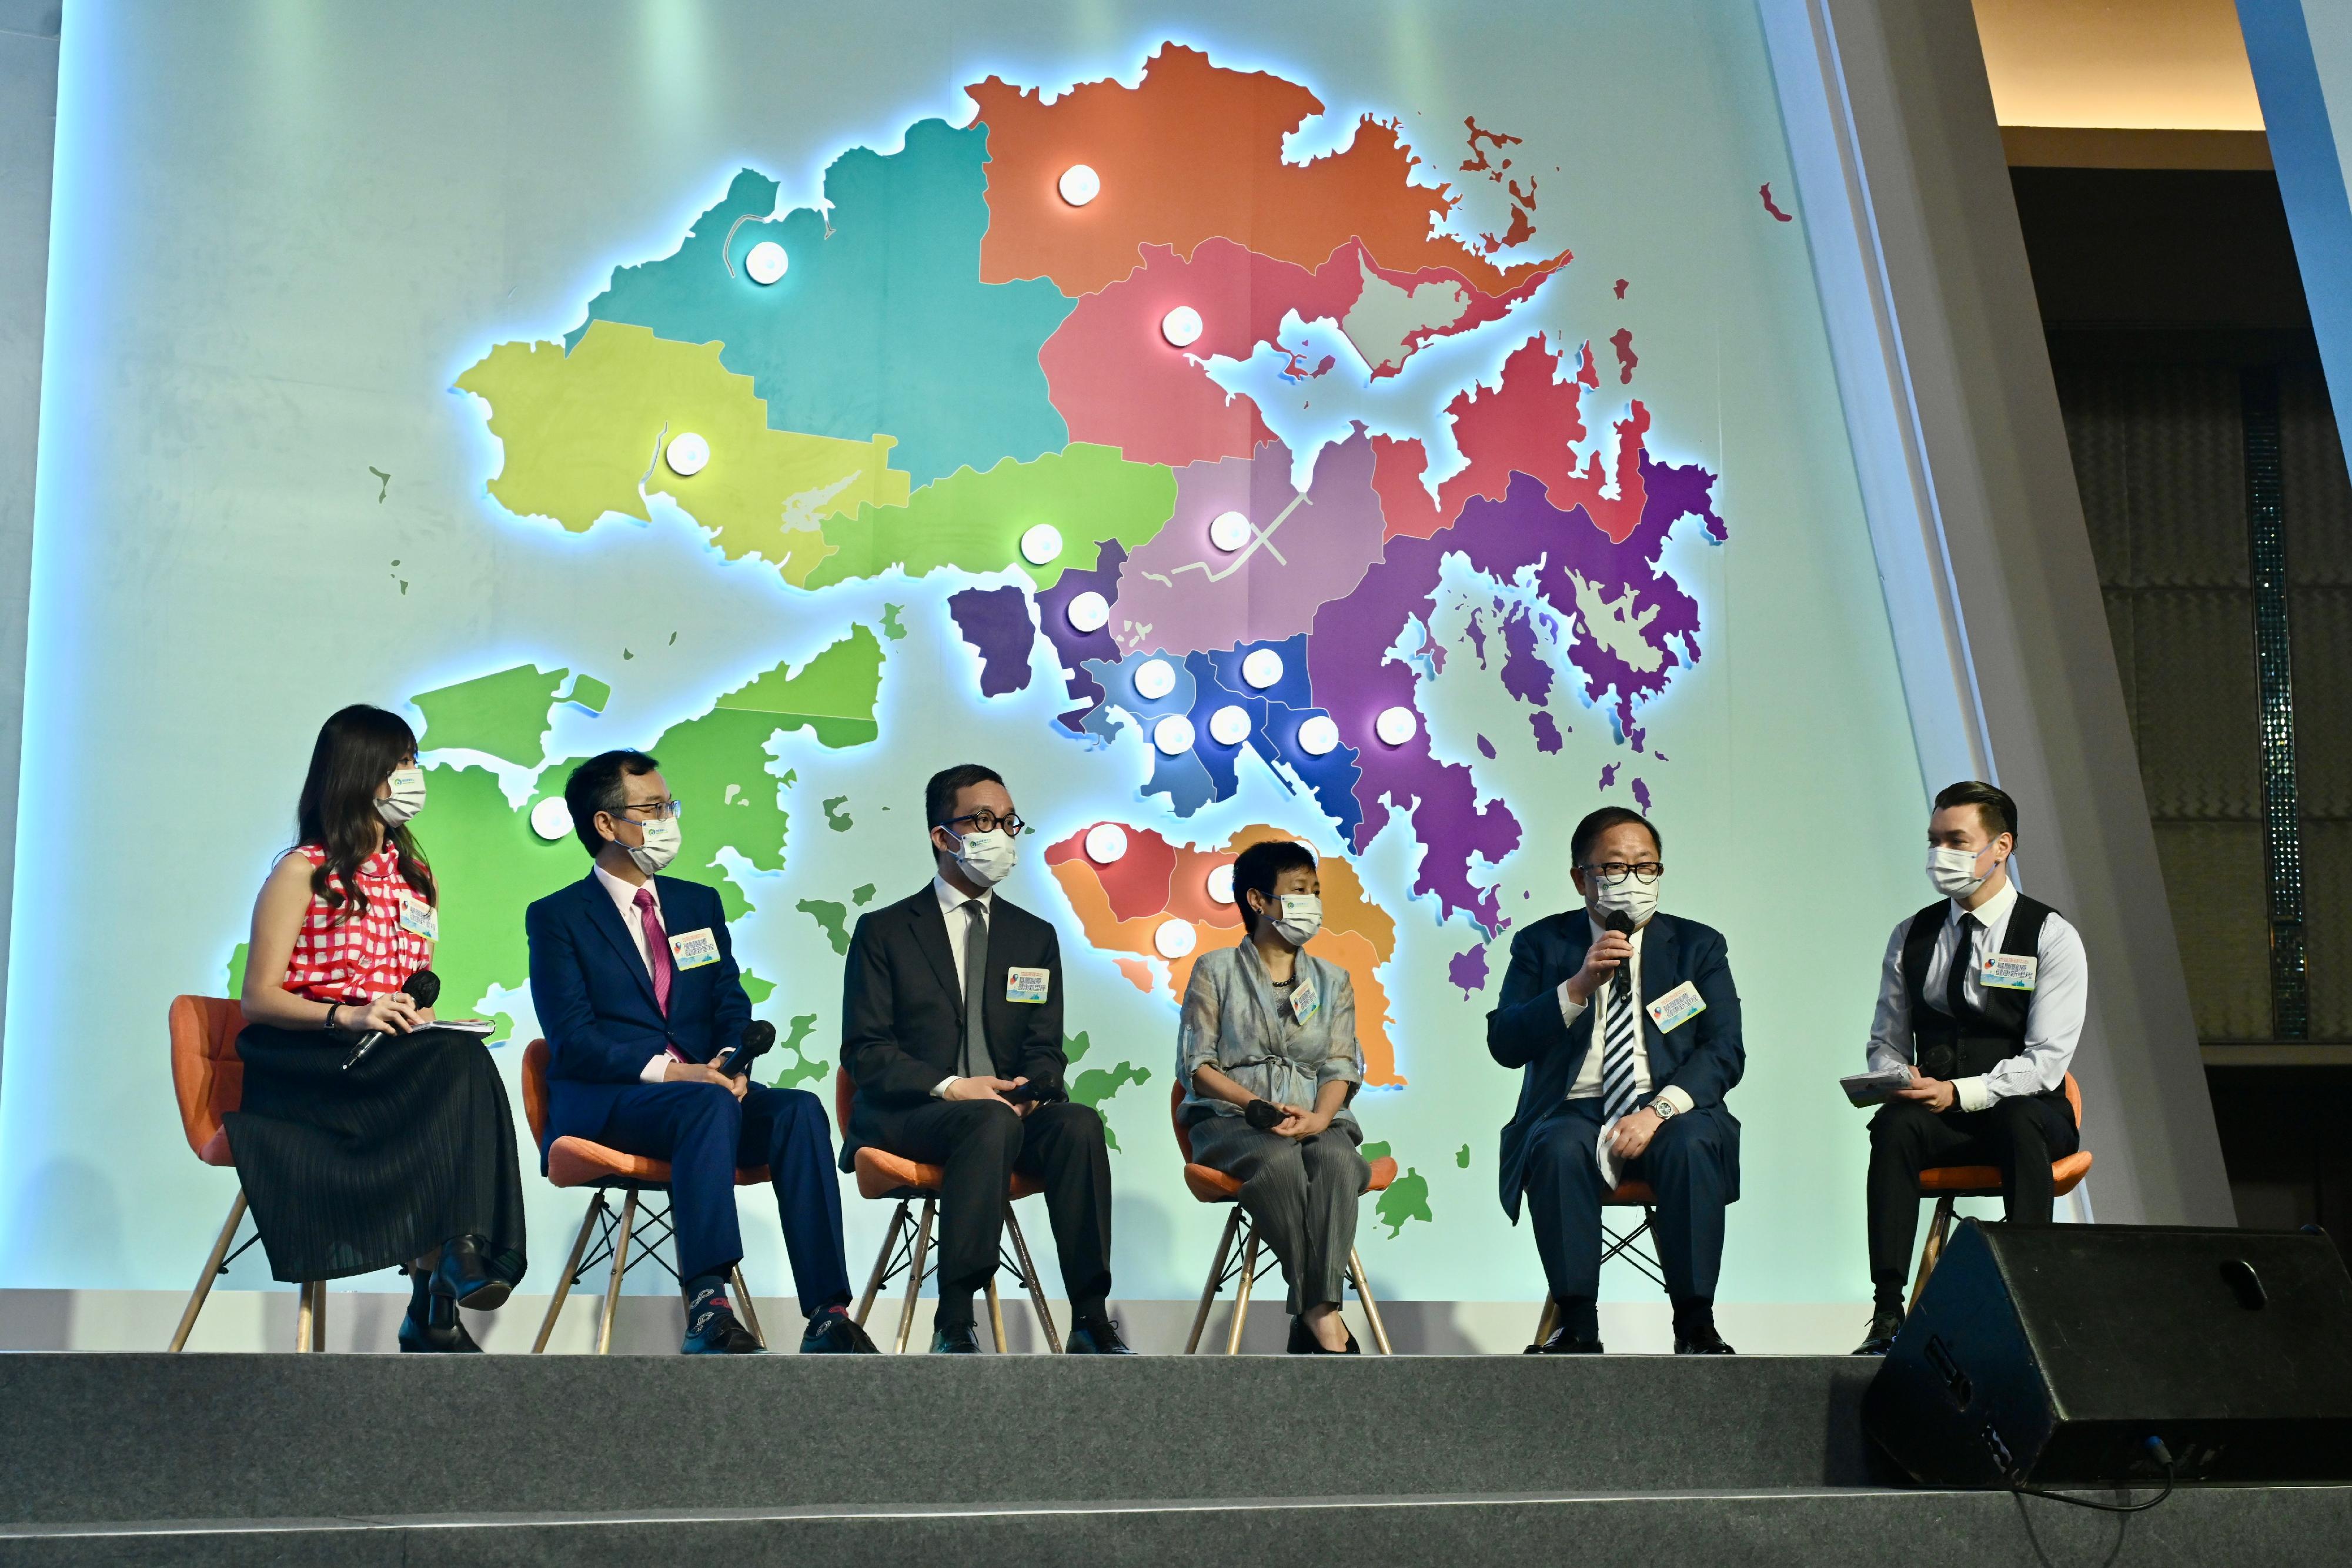 Convenors of the Steering Committee on Primary Healthcare Development, (From second left) Dr Lam Ching-choi, Professor Gabriel Leung, Professor Frances Wong, and Dr Donald Li, talk about the importance of developing a district-based primary healthcare system at the “District Health Centre – New Journey in Primary Healthcare” Ceremony today (June 15).